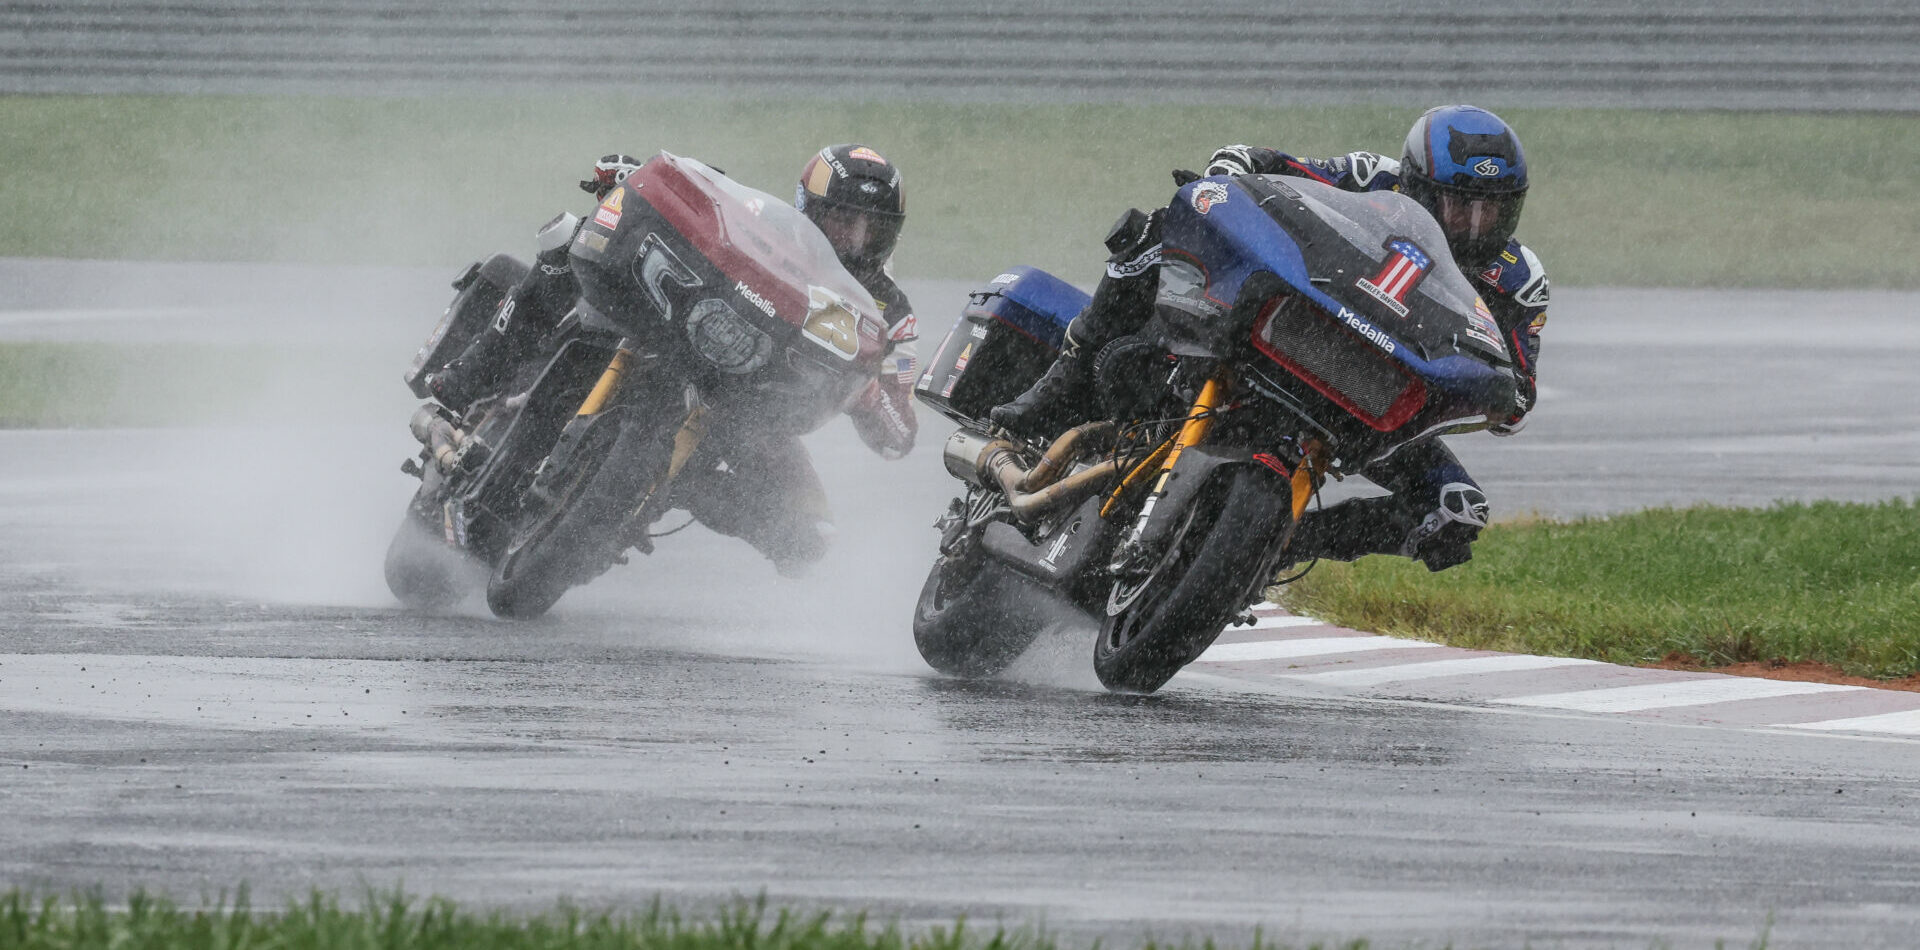 Kyle Wyman (1) and Tyler O'Hara (29) fight for the lead in the wet King Of The Baggers race. Photo by Brian J. Nelson, courtesy Harley-Davidson.